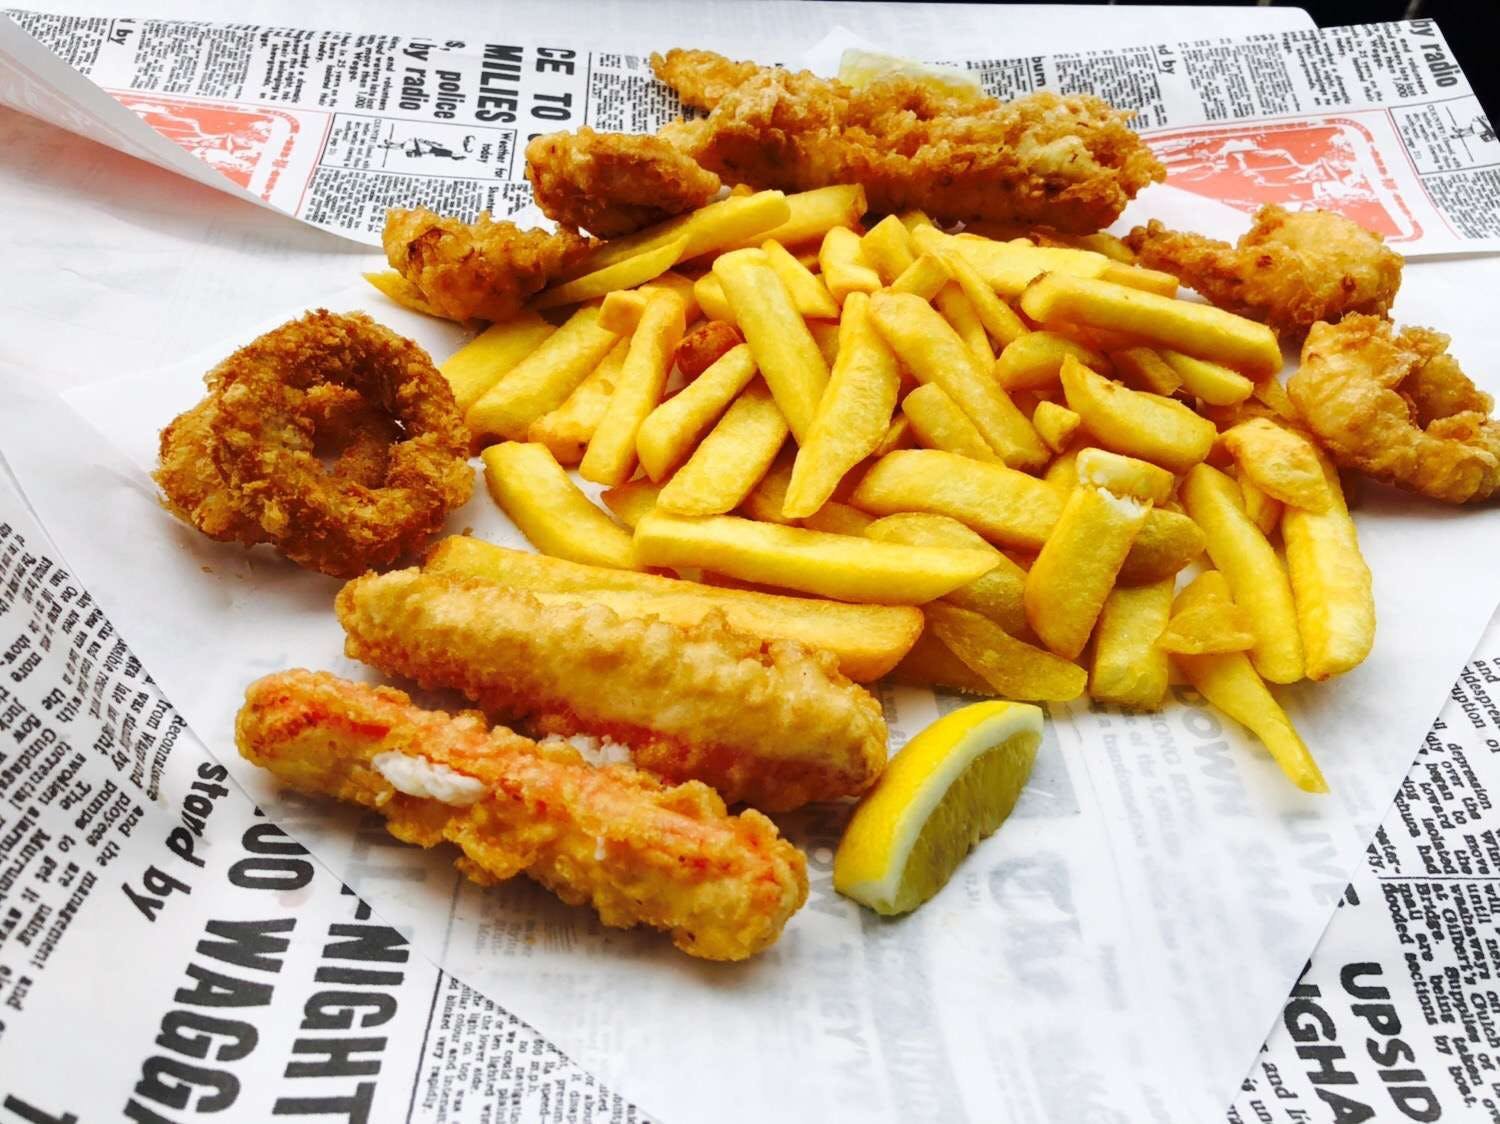 Oakleigh Fish  Chippery - Broome Tourism